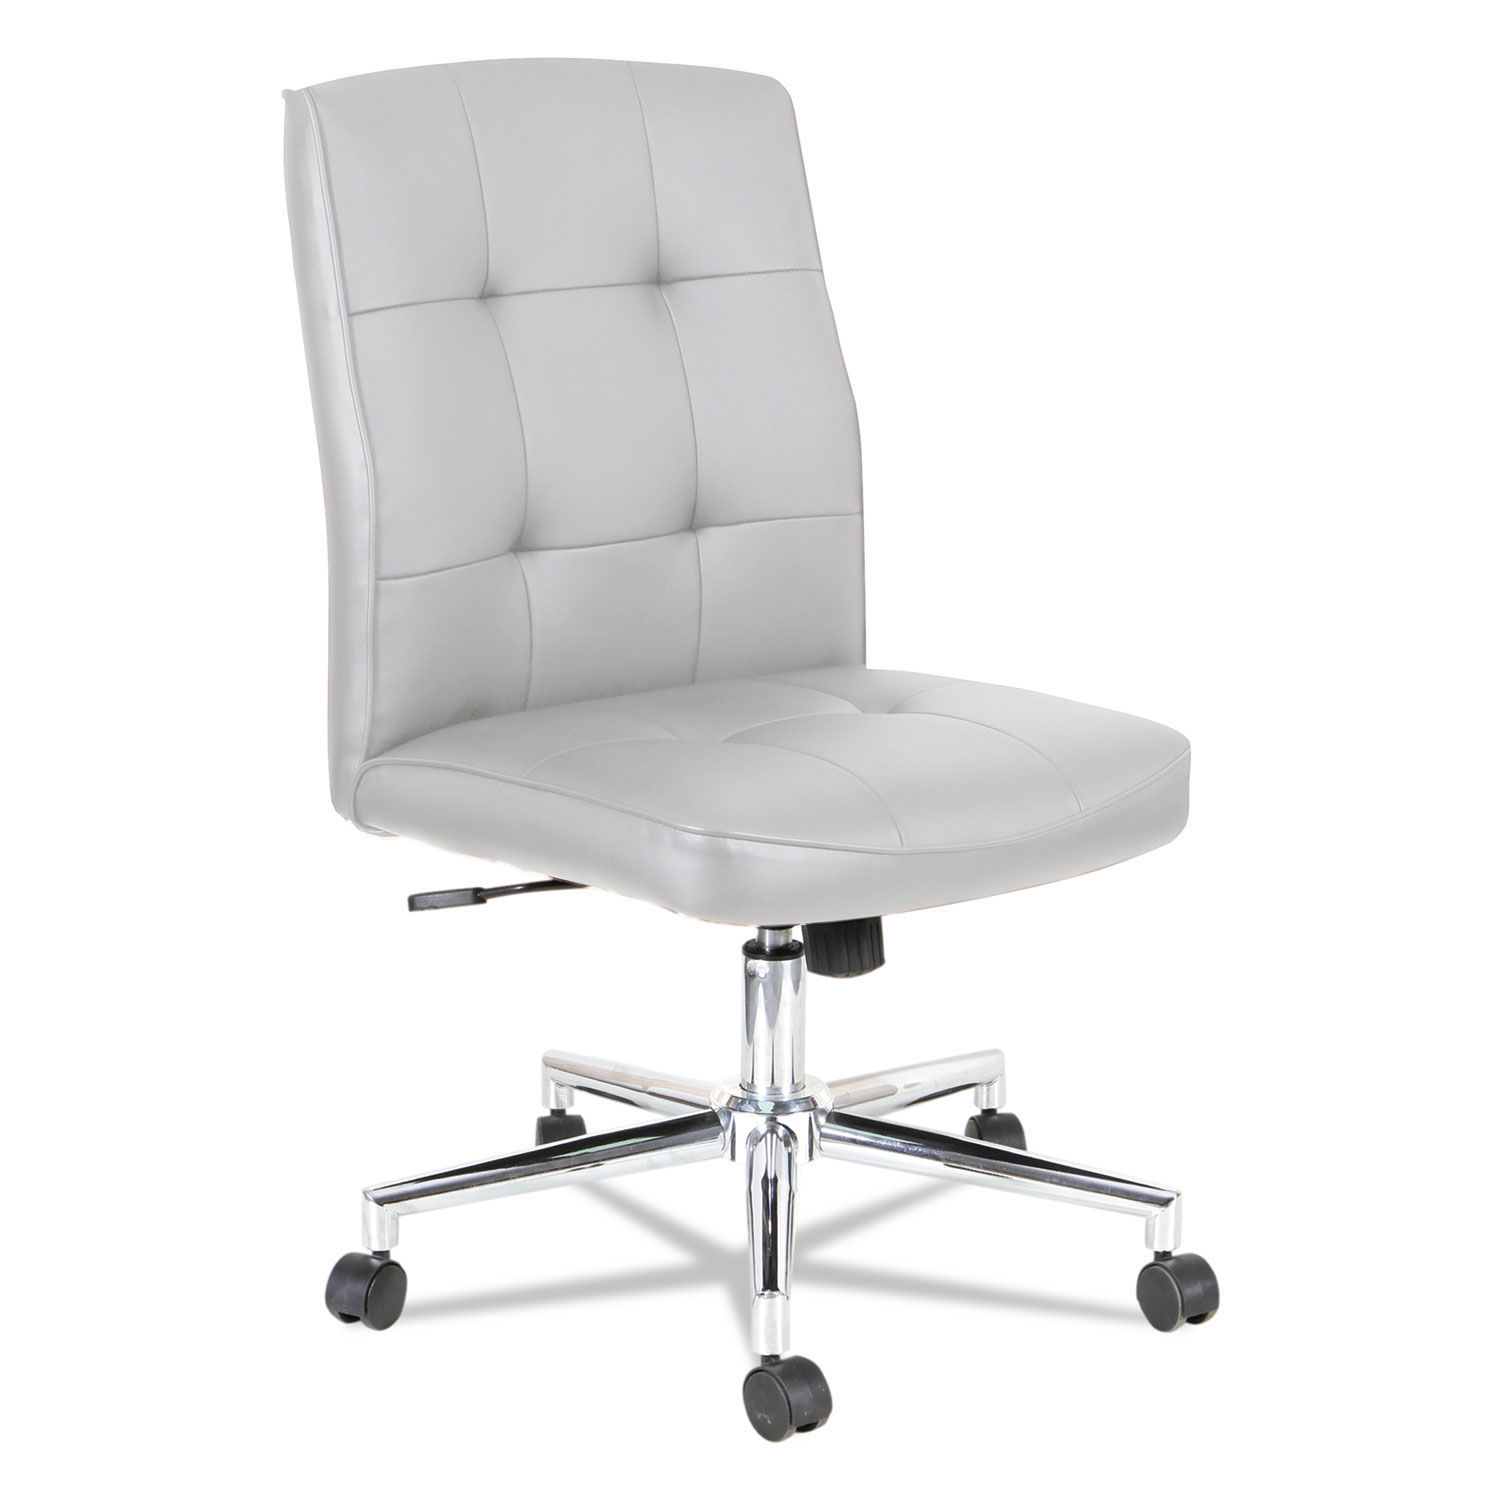 Slimline Swivel/Tilt Task Chair Supports Up to 275 lb, 17.51" to 21.45" Seat Height, White Seat/Back, Chrome Base